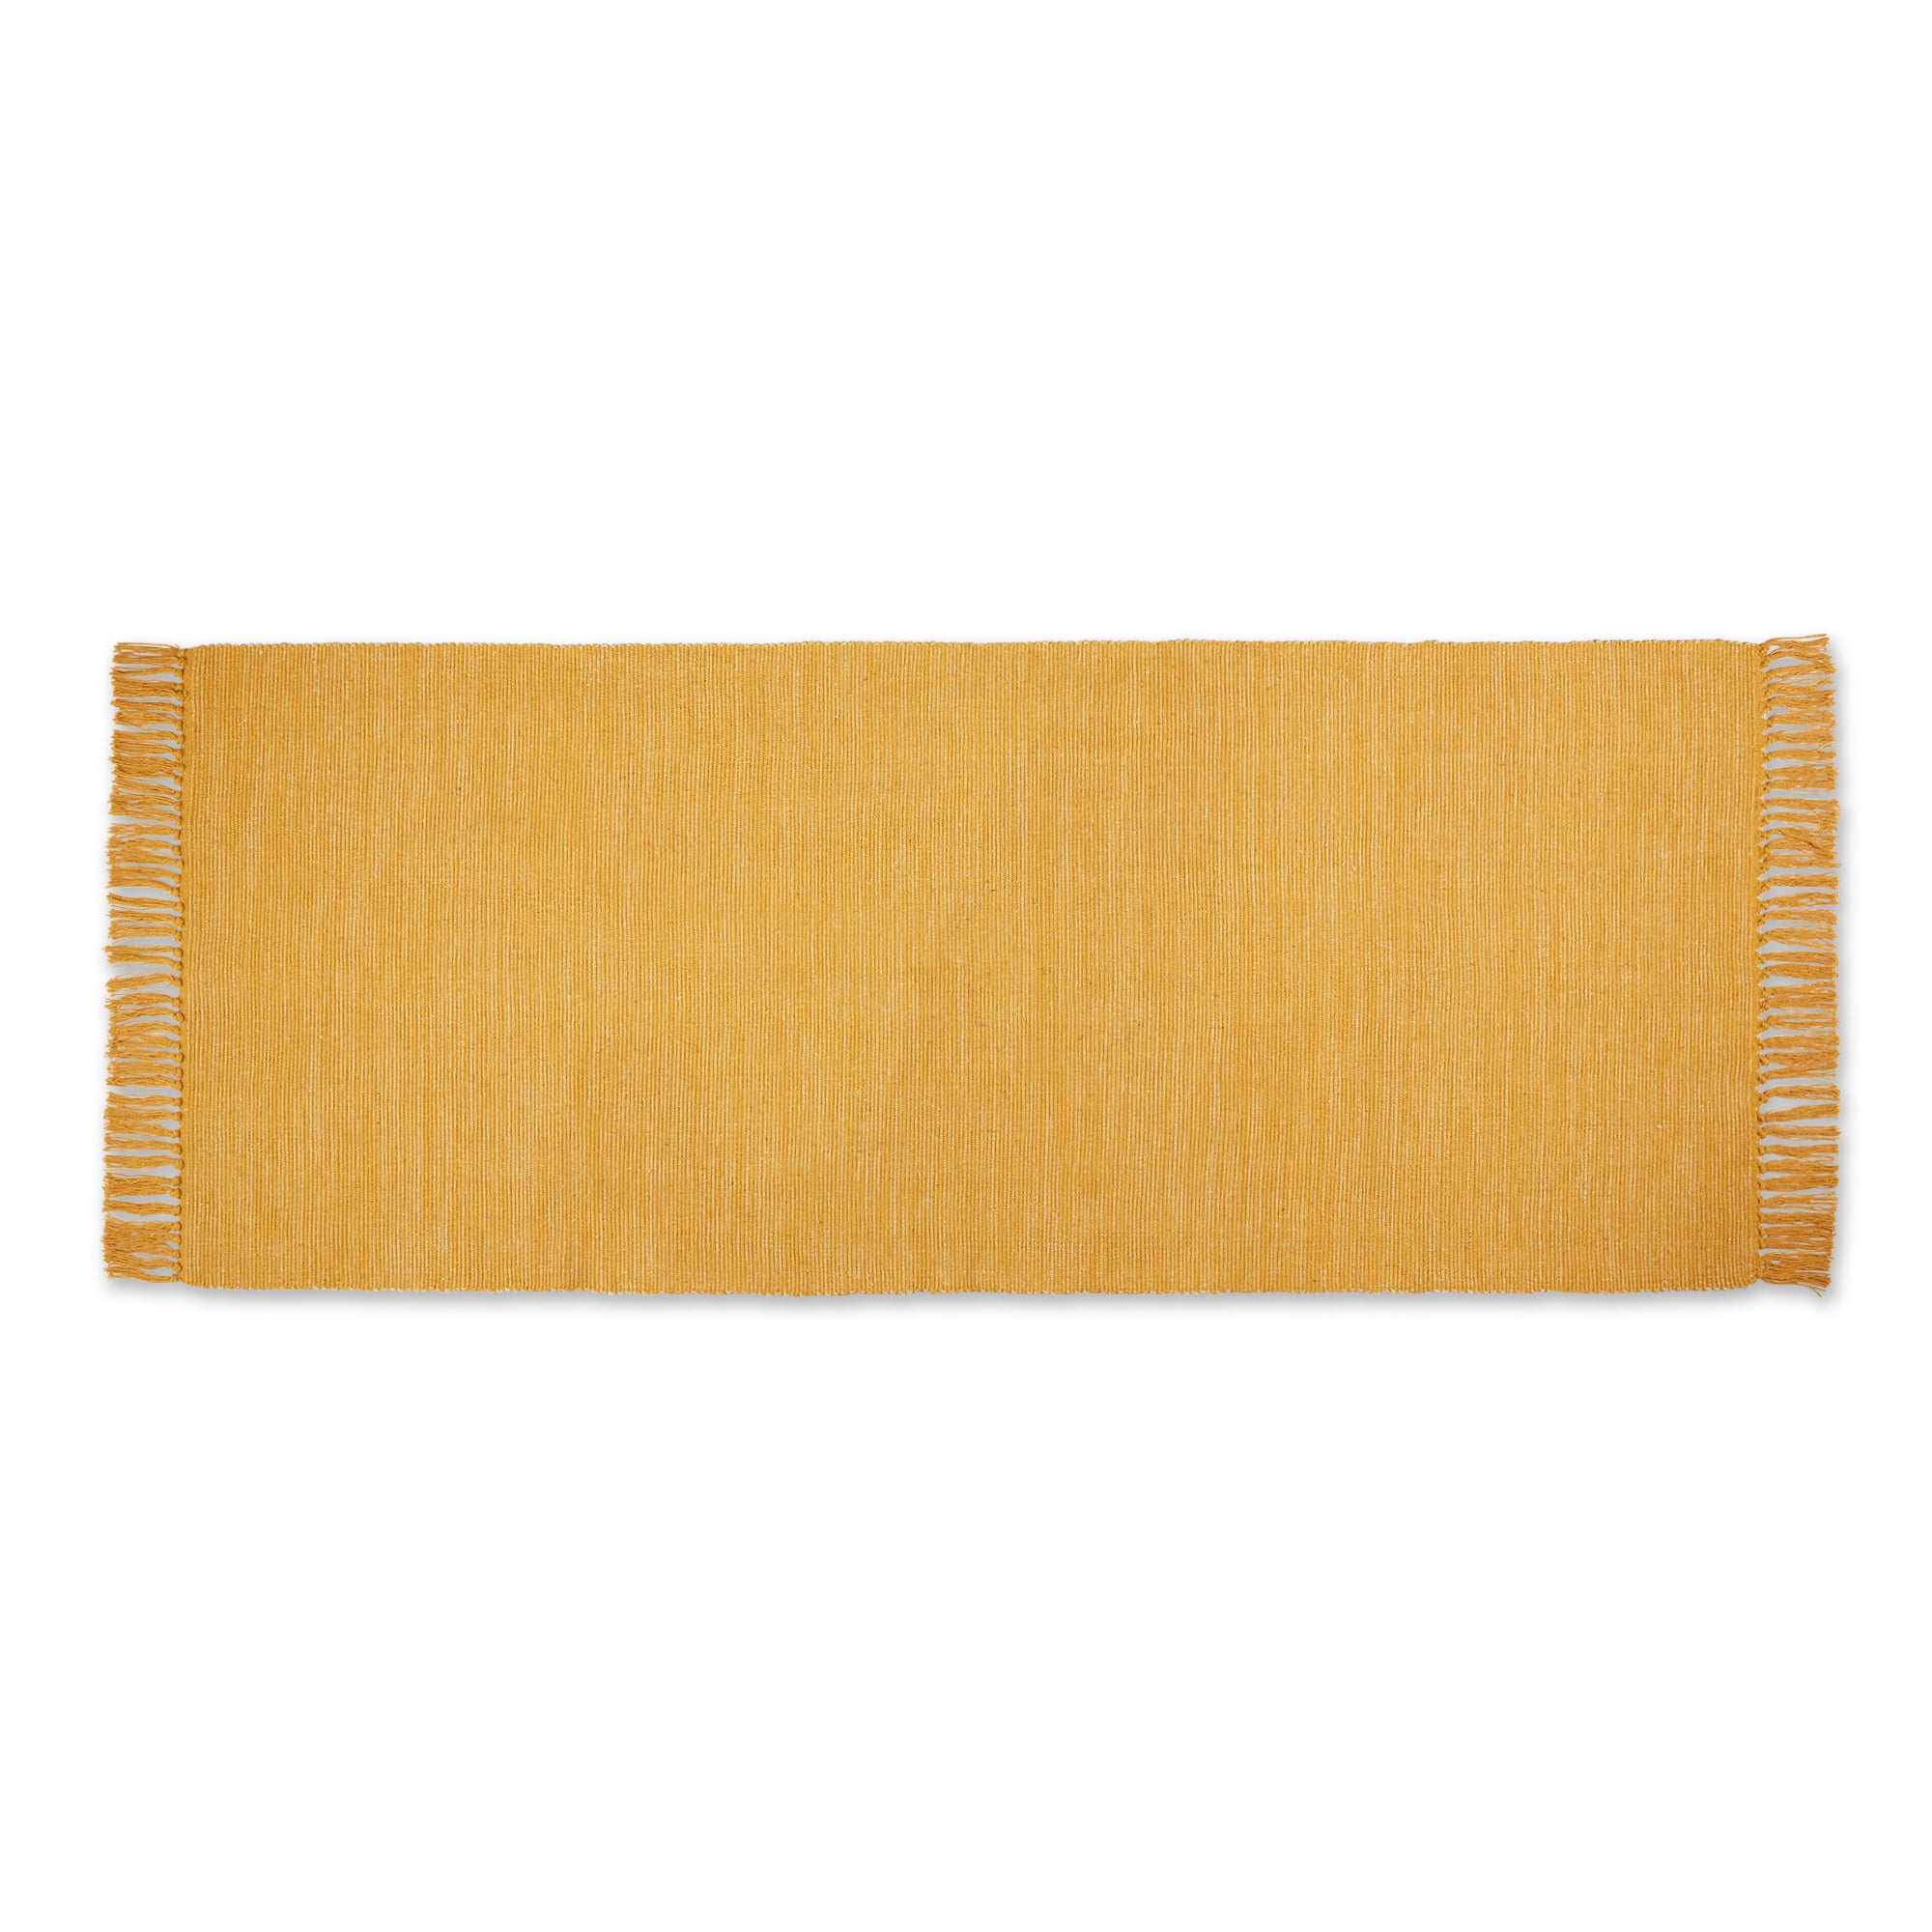 Honey Gold and Off White 2-Tone Ribbed Rug 2 Ft 6 in x 6Ft - Walmart.com